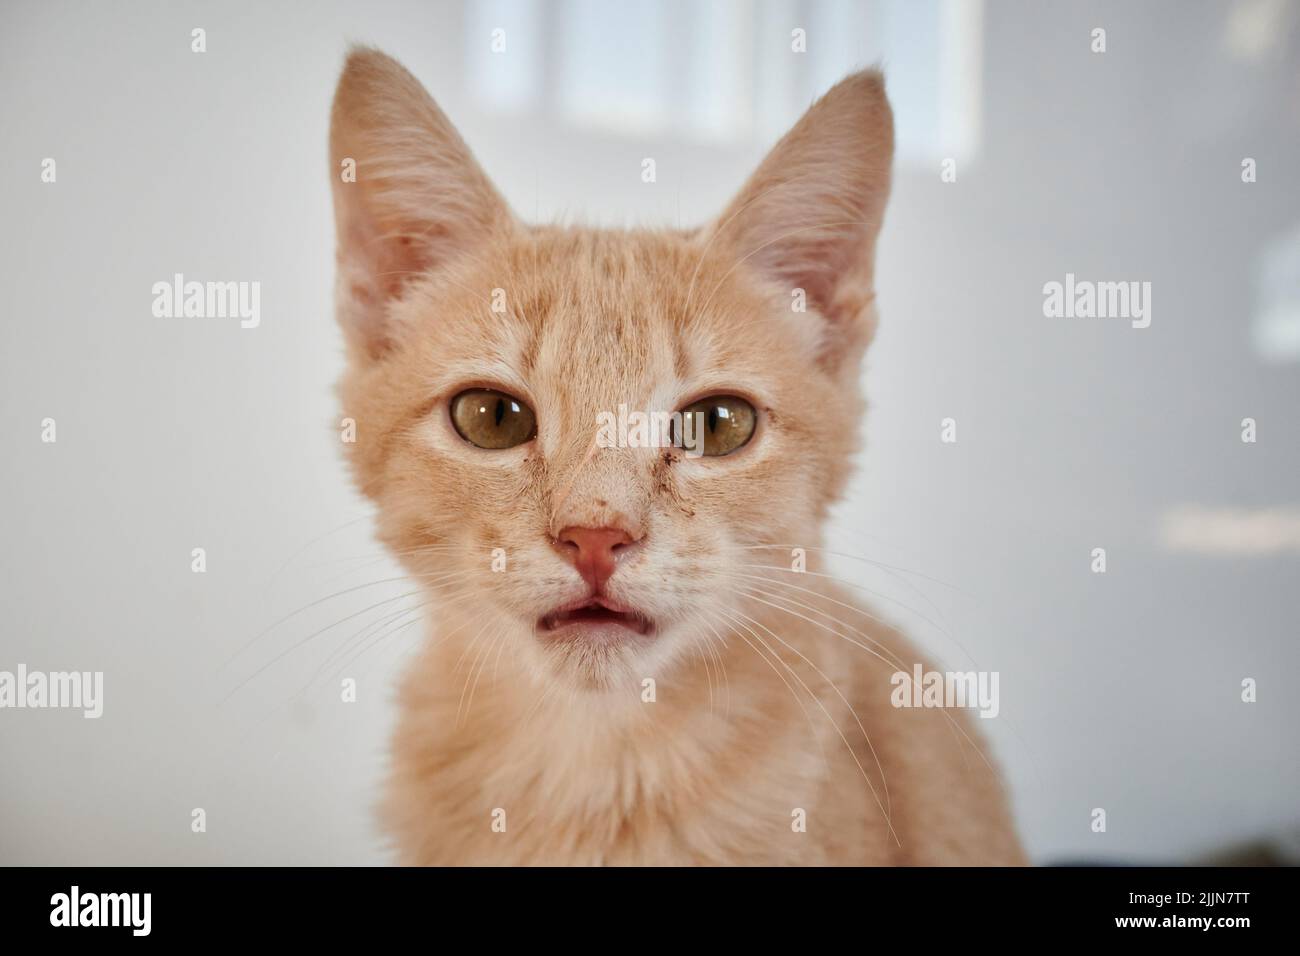 A close-up shot of the face of a red tabby shorthair cat inside the house during daytime with blurred white background Stock Photo